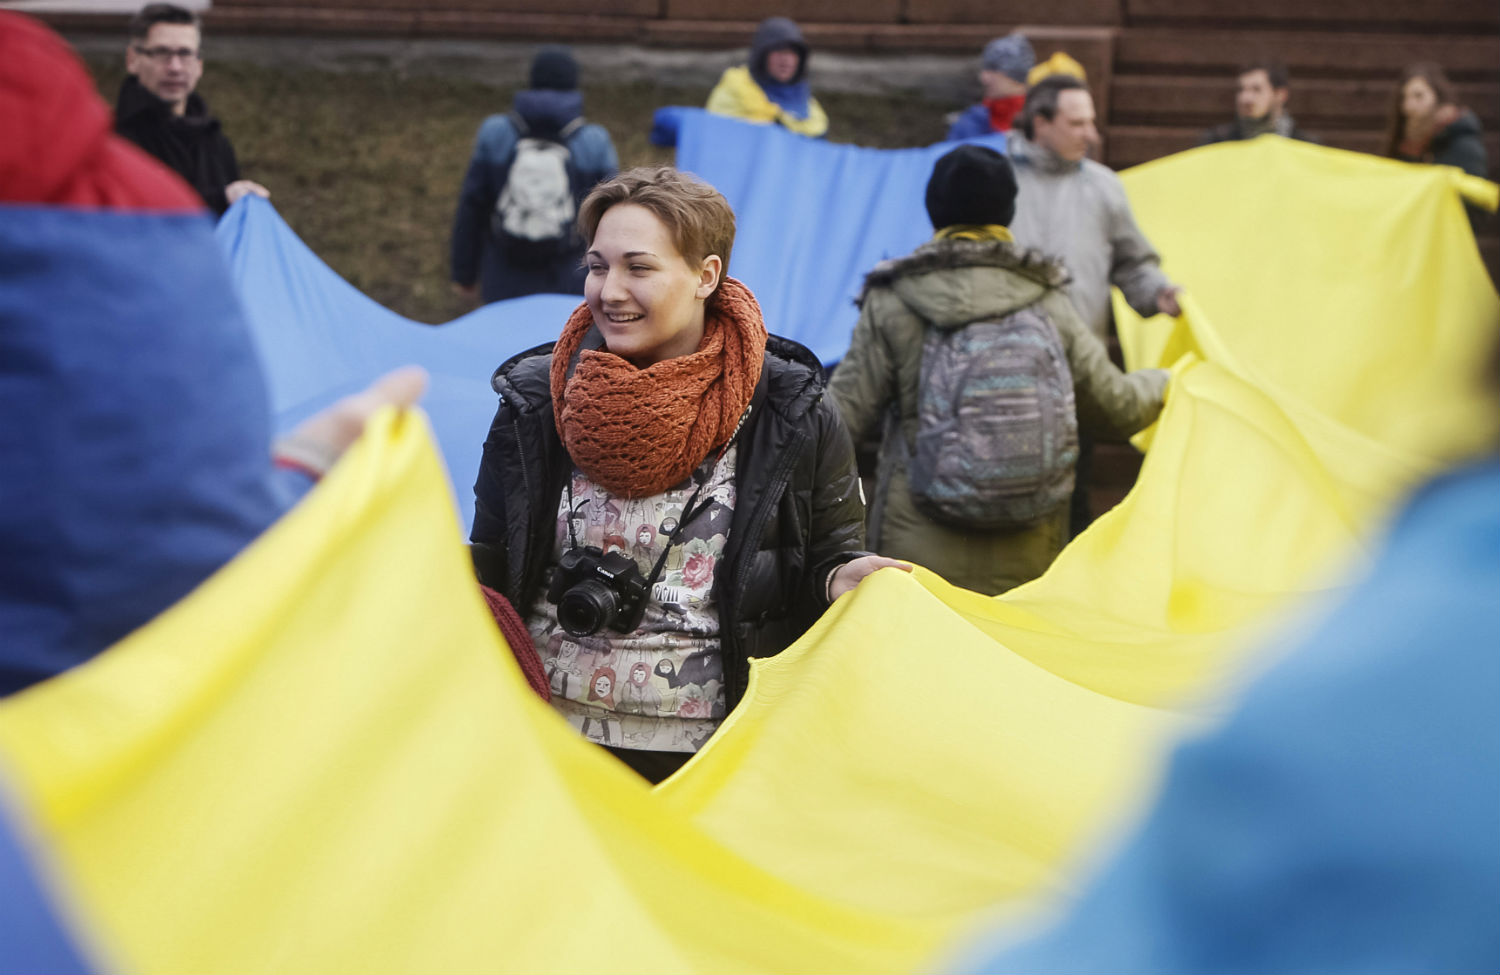 As Far-Right Groups Infiltrate Kiev’s Institutions, the Student Movement Pushes Back